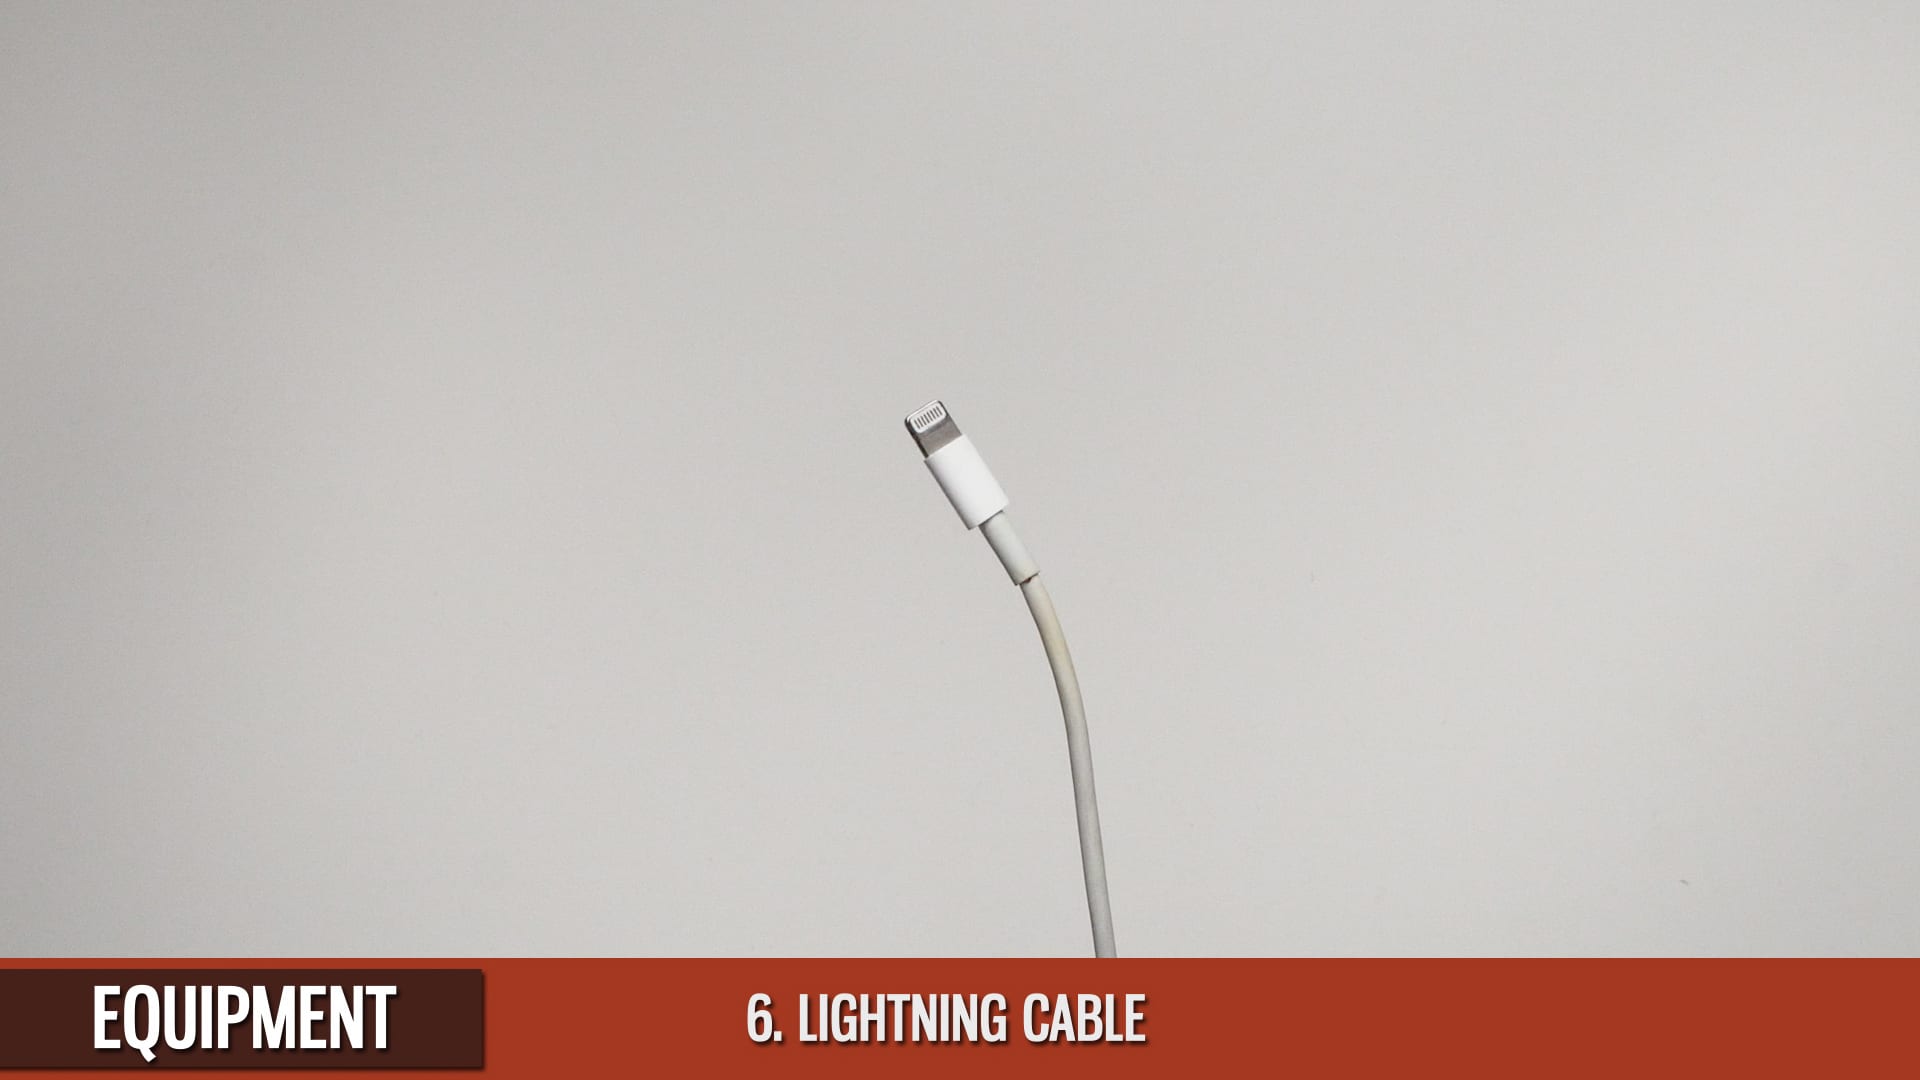 IPhone-Overhead-Ligthning-Cable